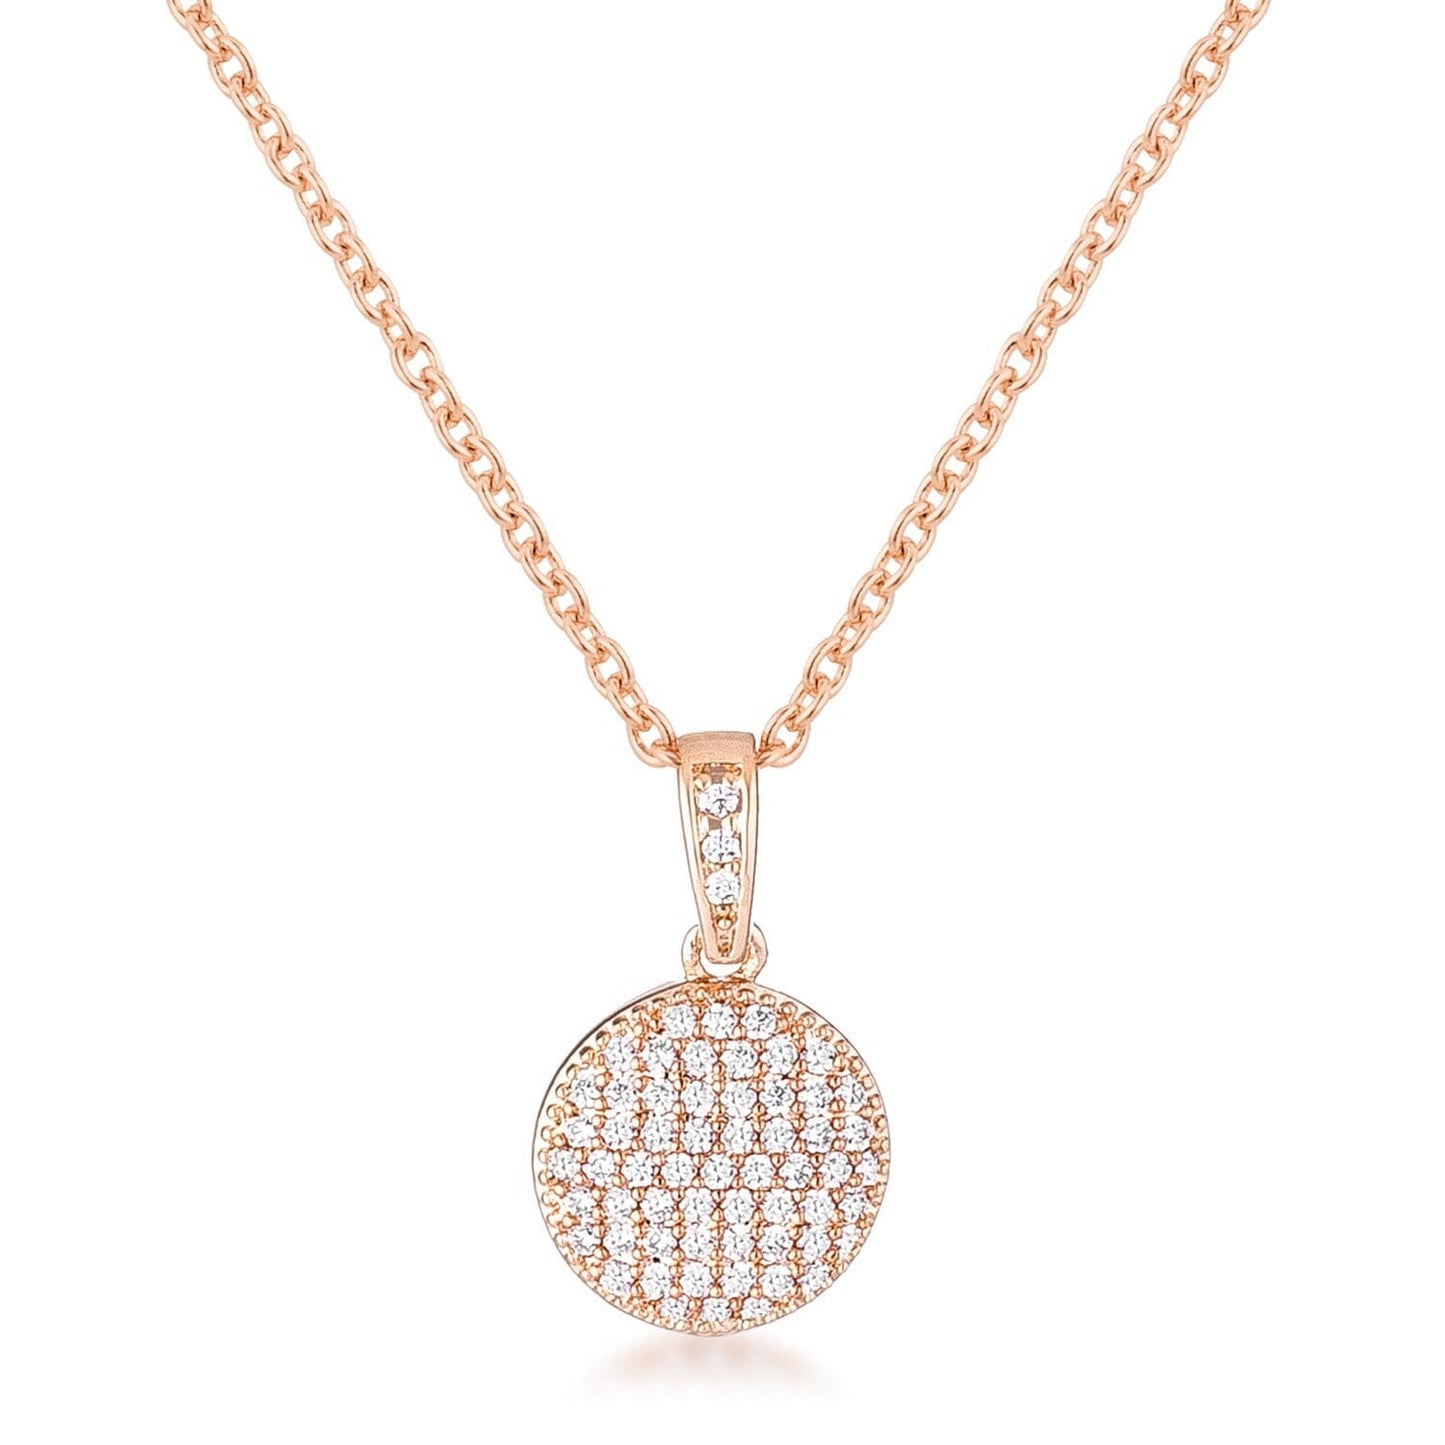 Rose Gold Plated Necklace with Cubic Zirconia Disk Pendant Pendants Das Juwel 